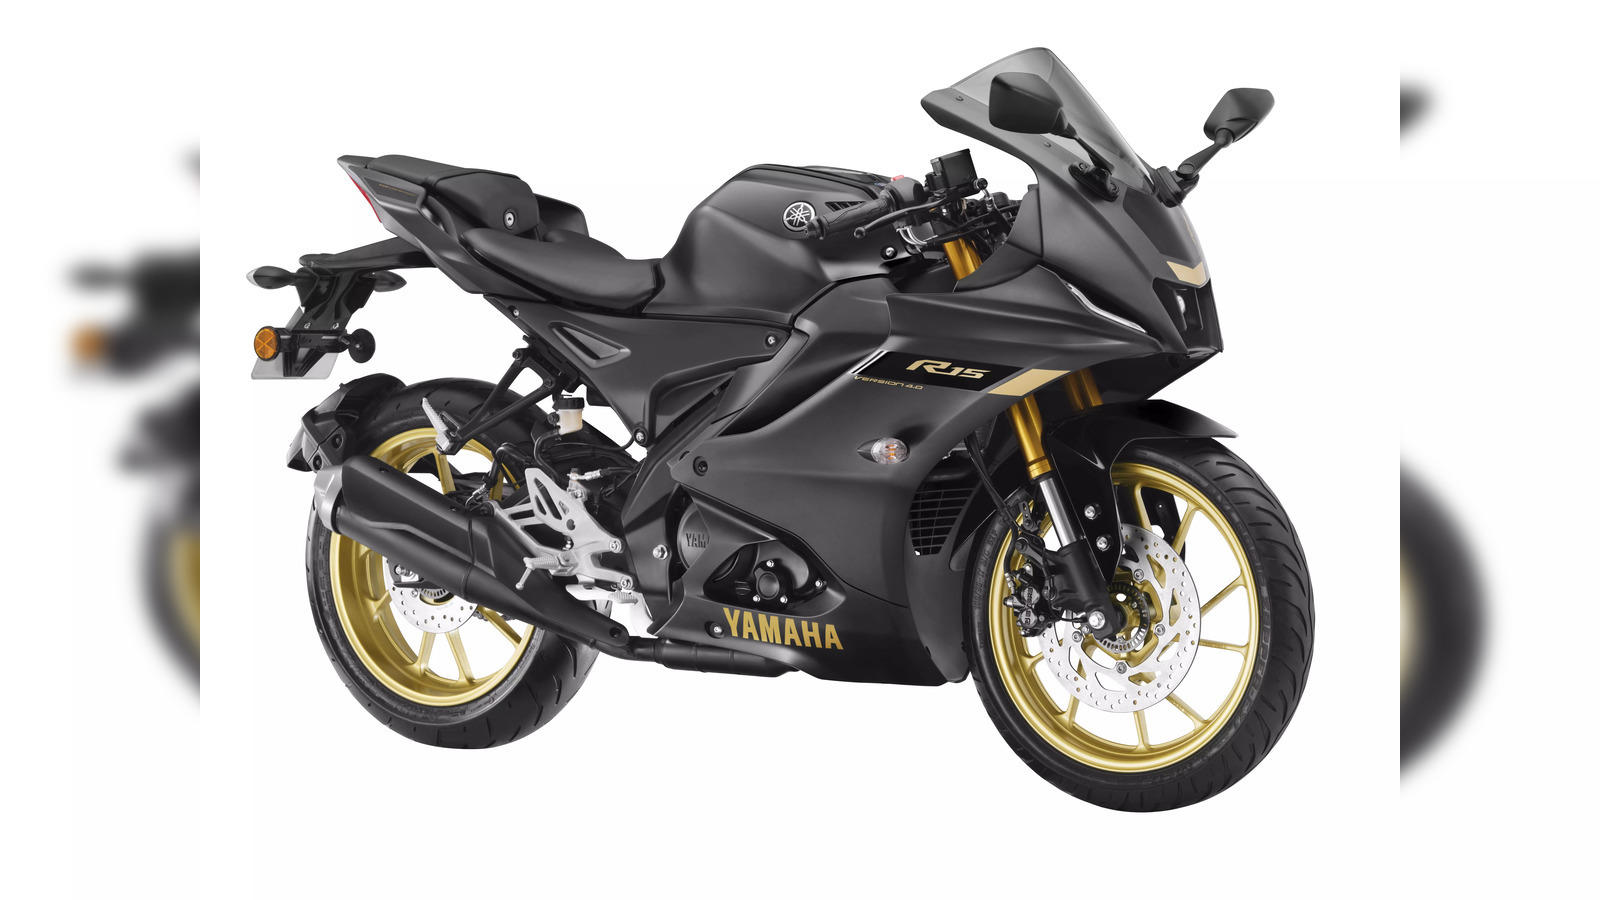 Top 5 Yamaha Bikes under 2 lakh in India